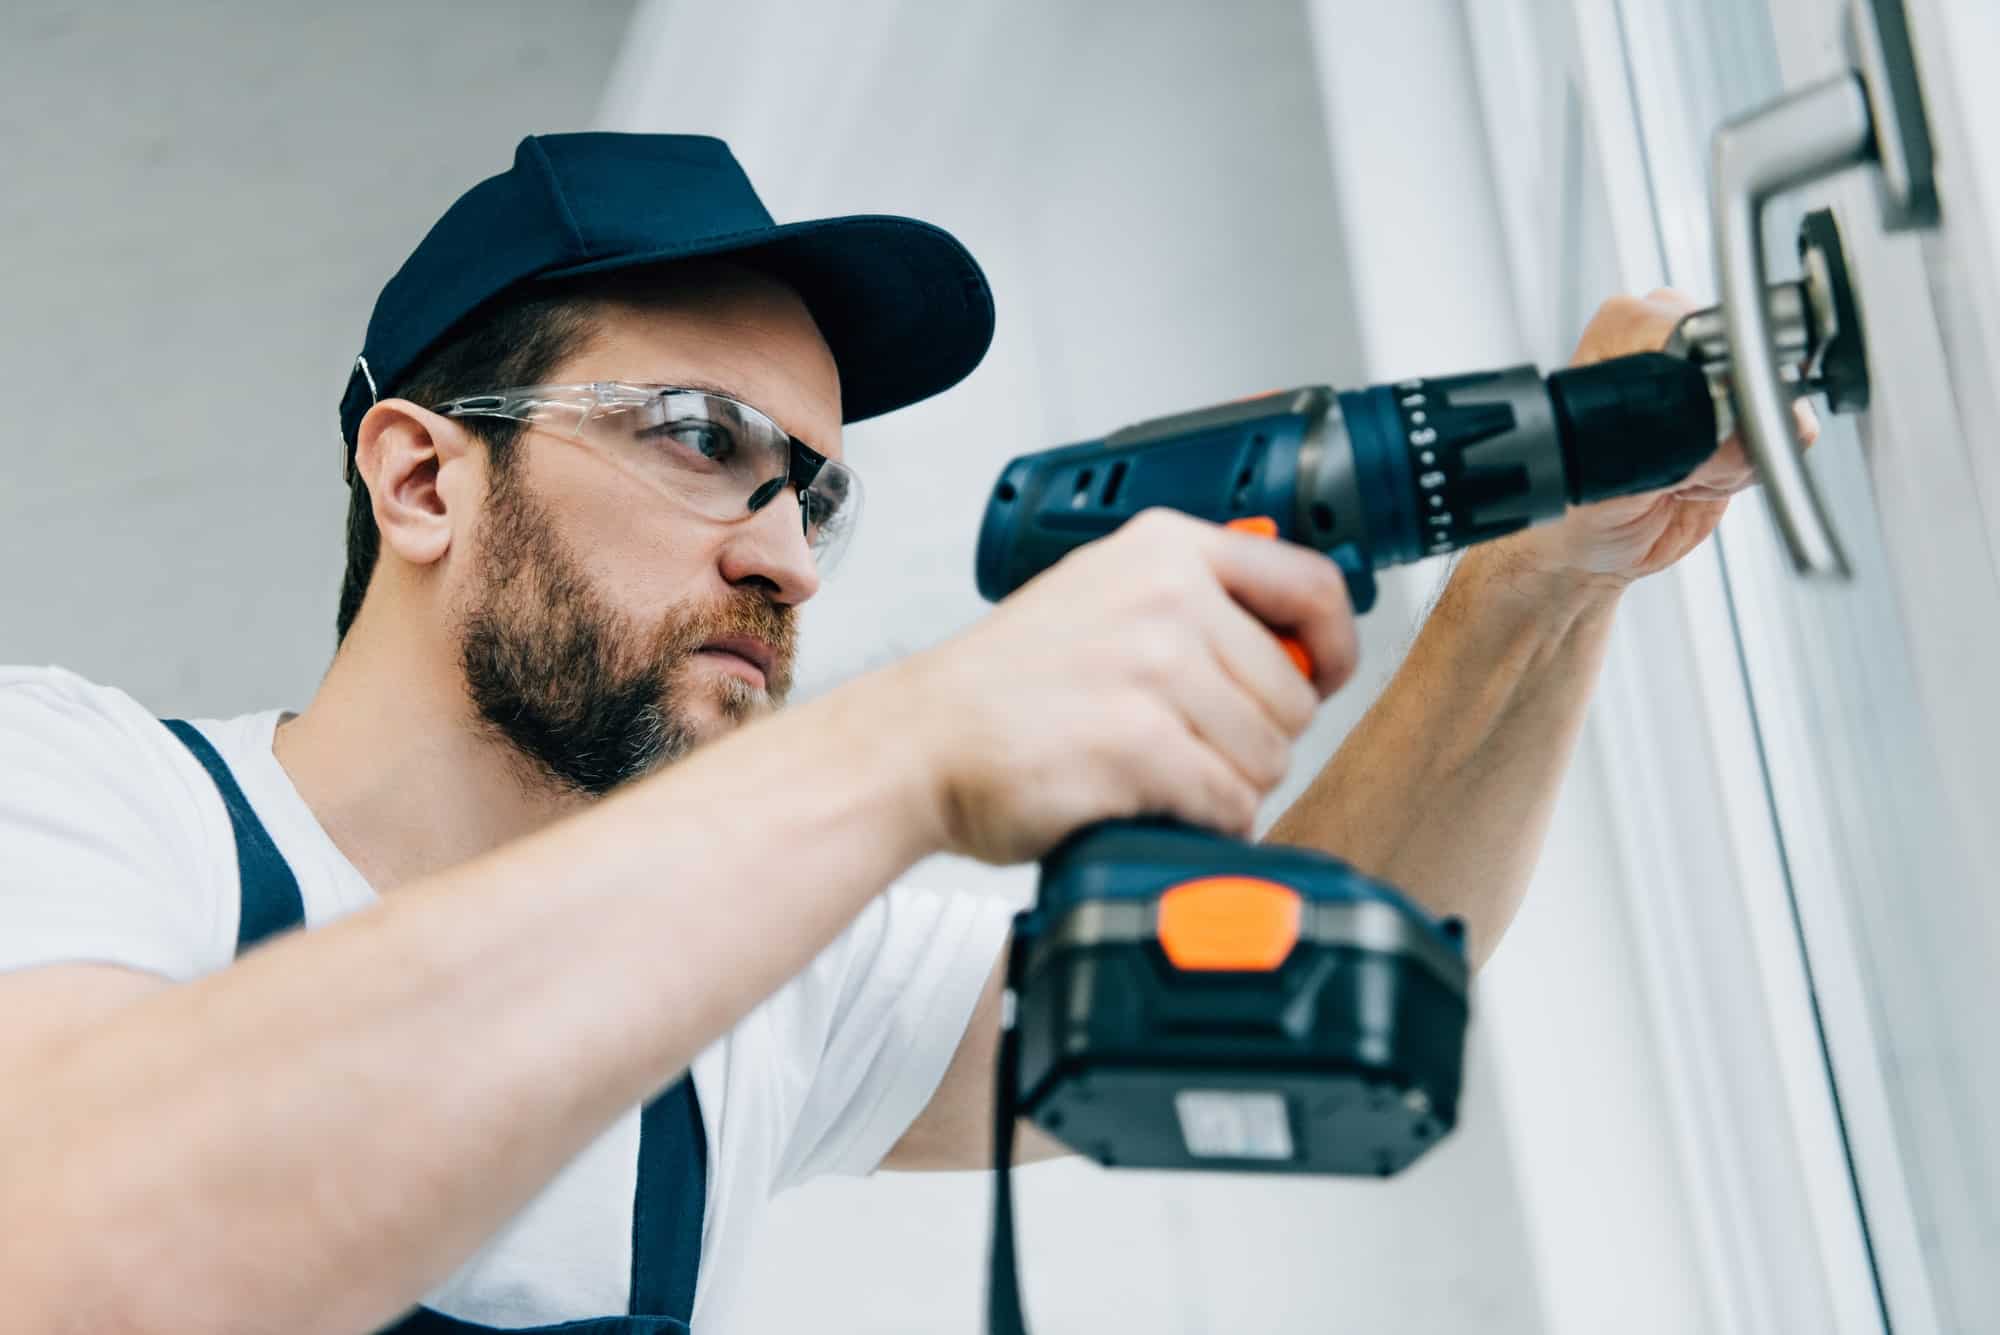 adult-repairman-in-goggles-fixing-window-handle-by-electric-drill.jpg